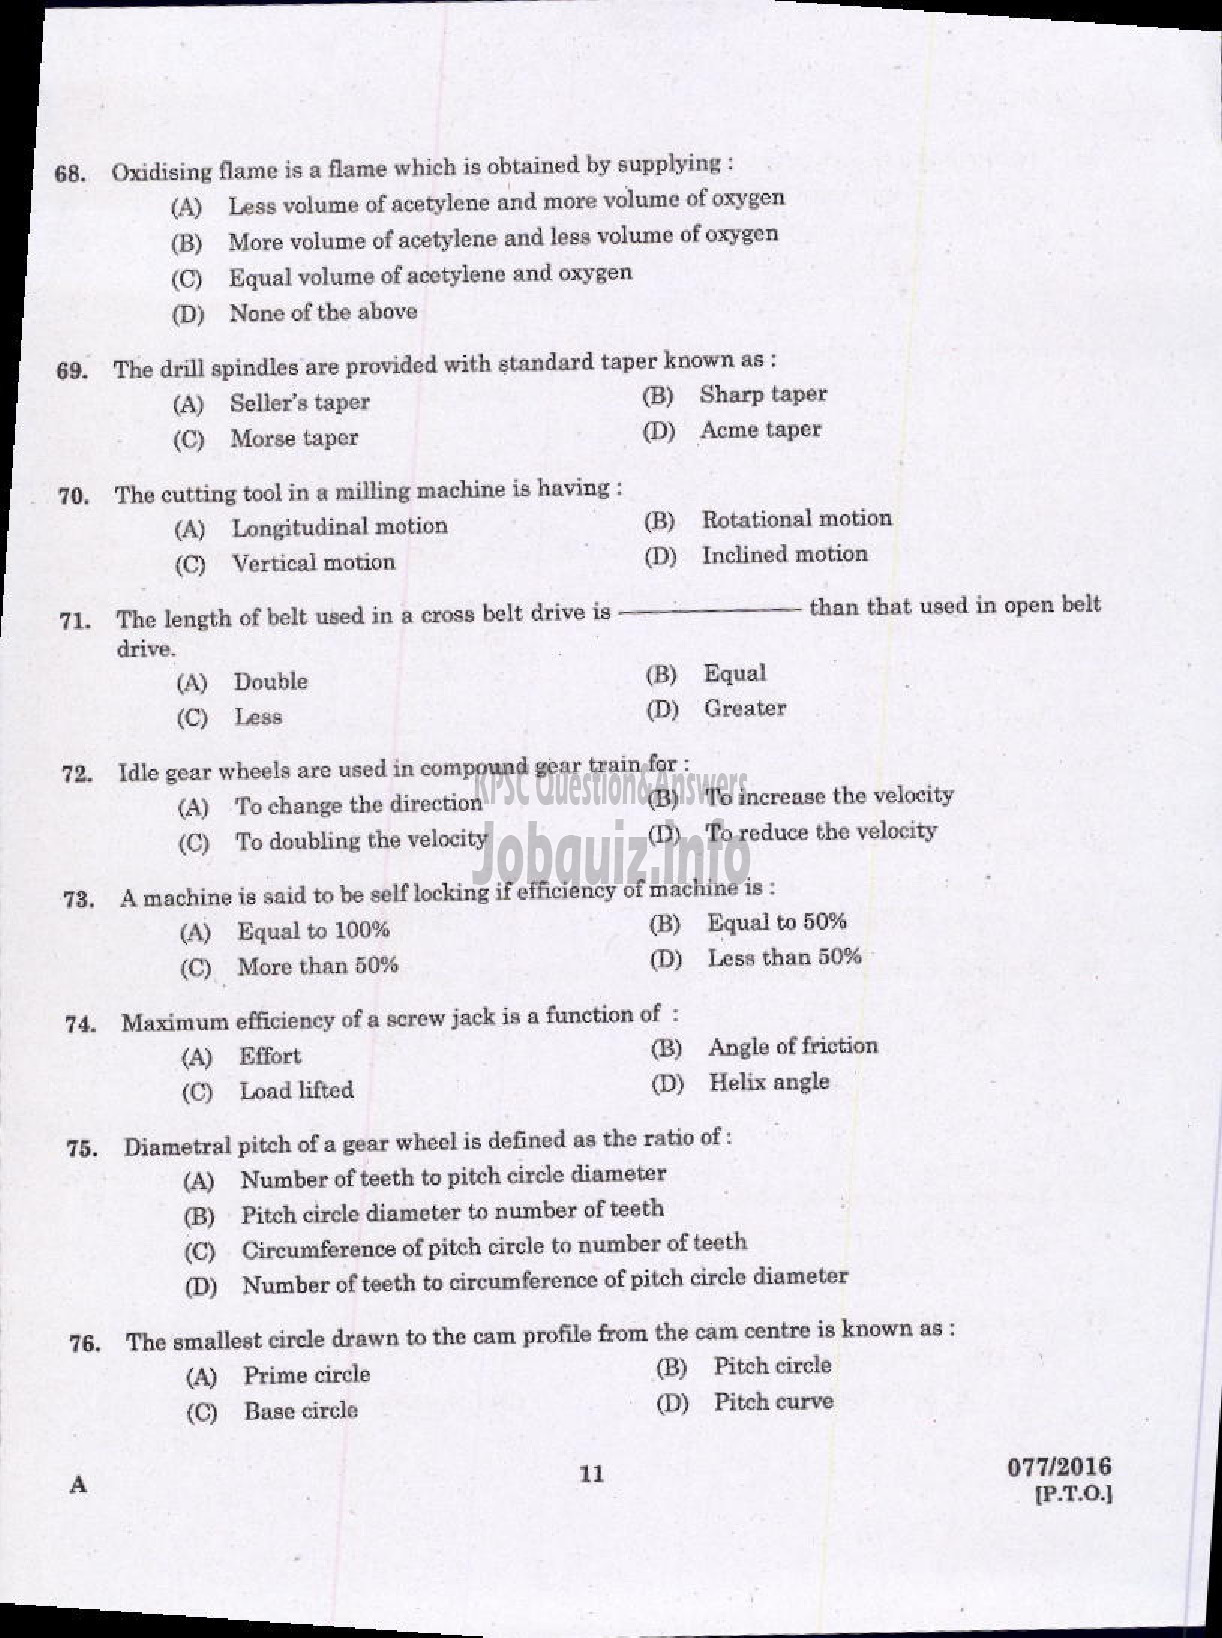 Kerala PSC Question Paper - VOCATIONAL INSTRUCTOR IN MECHANICAL SERVICING AGRO MACHINERY VHSE-9